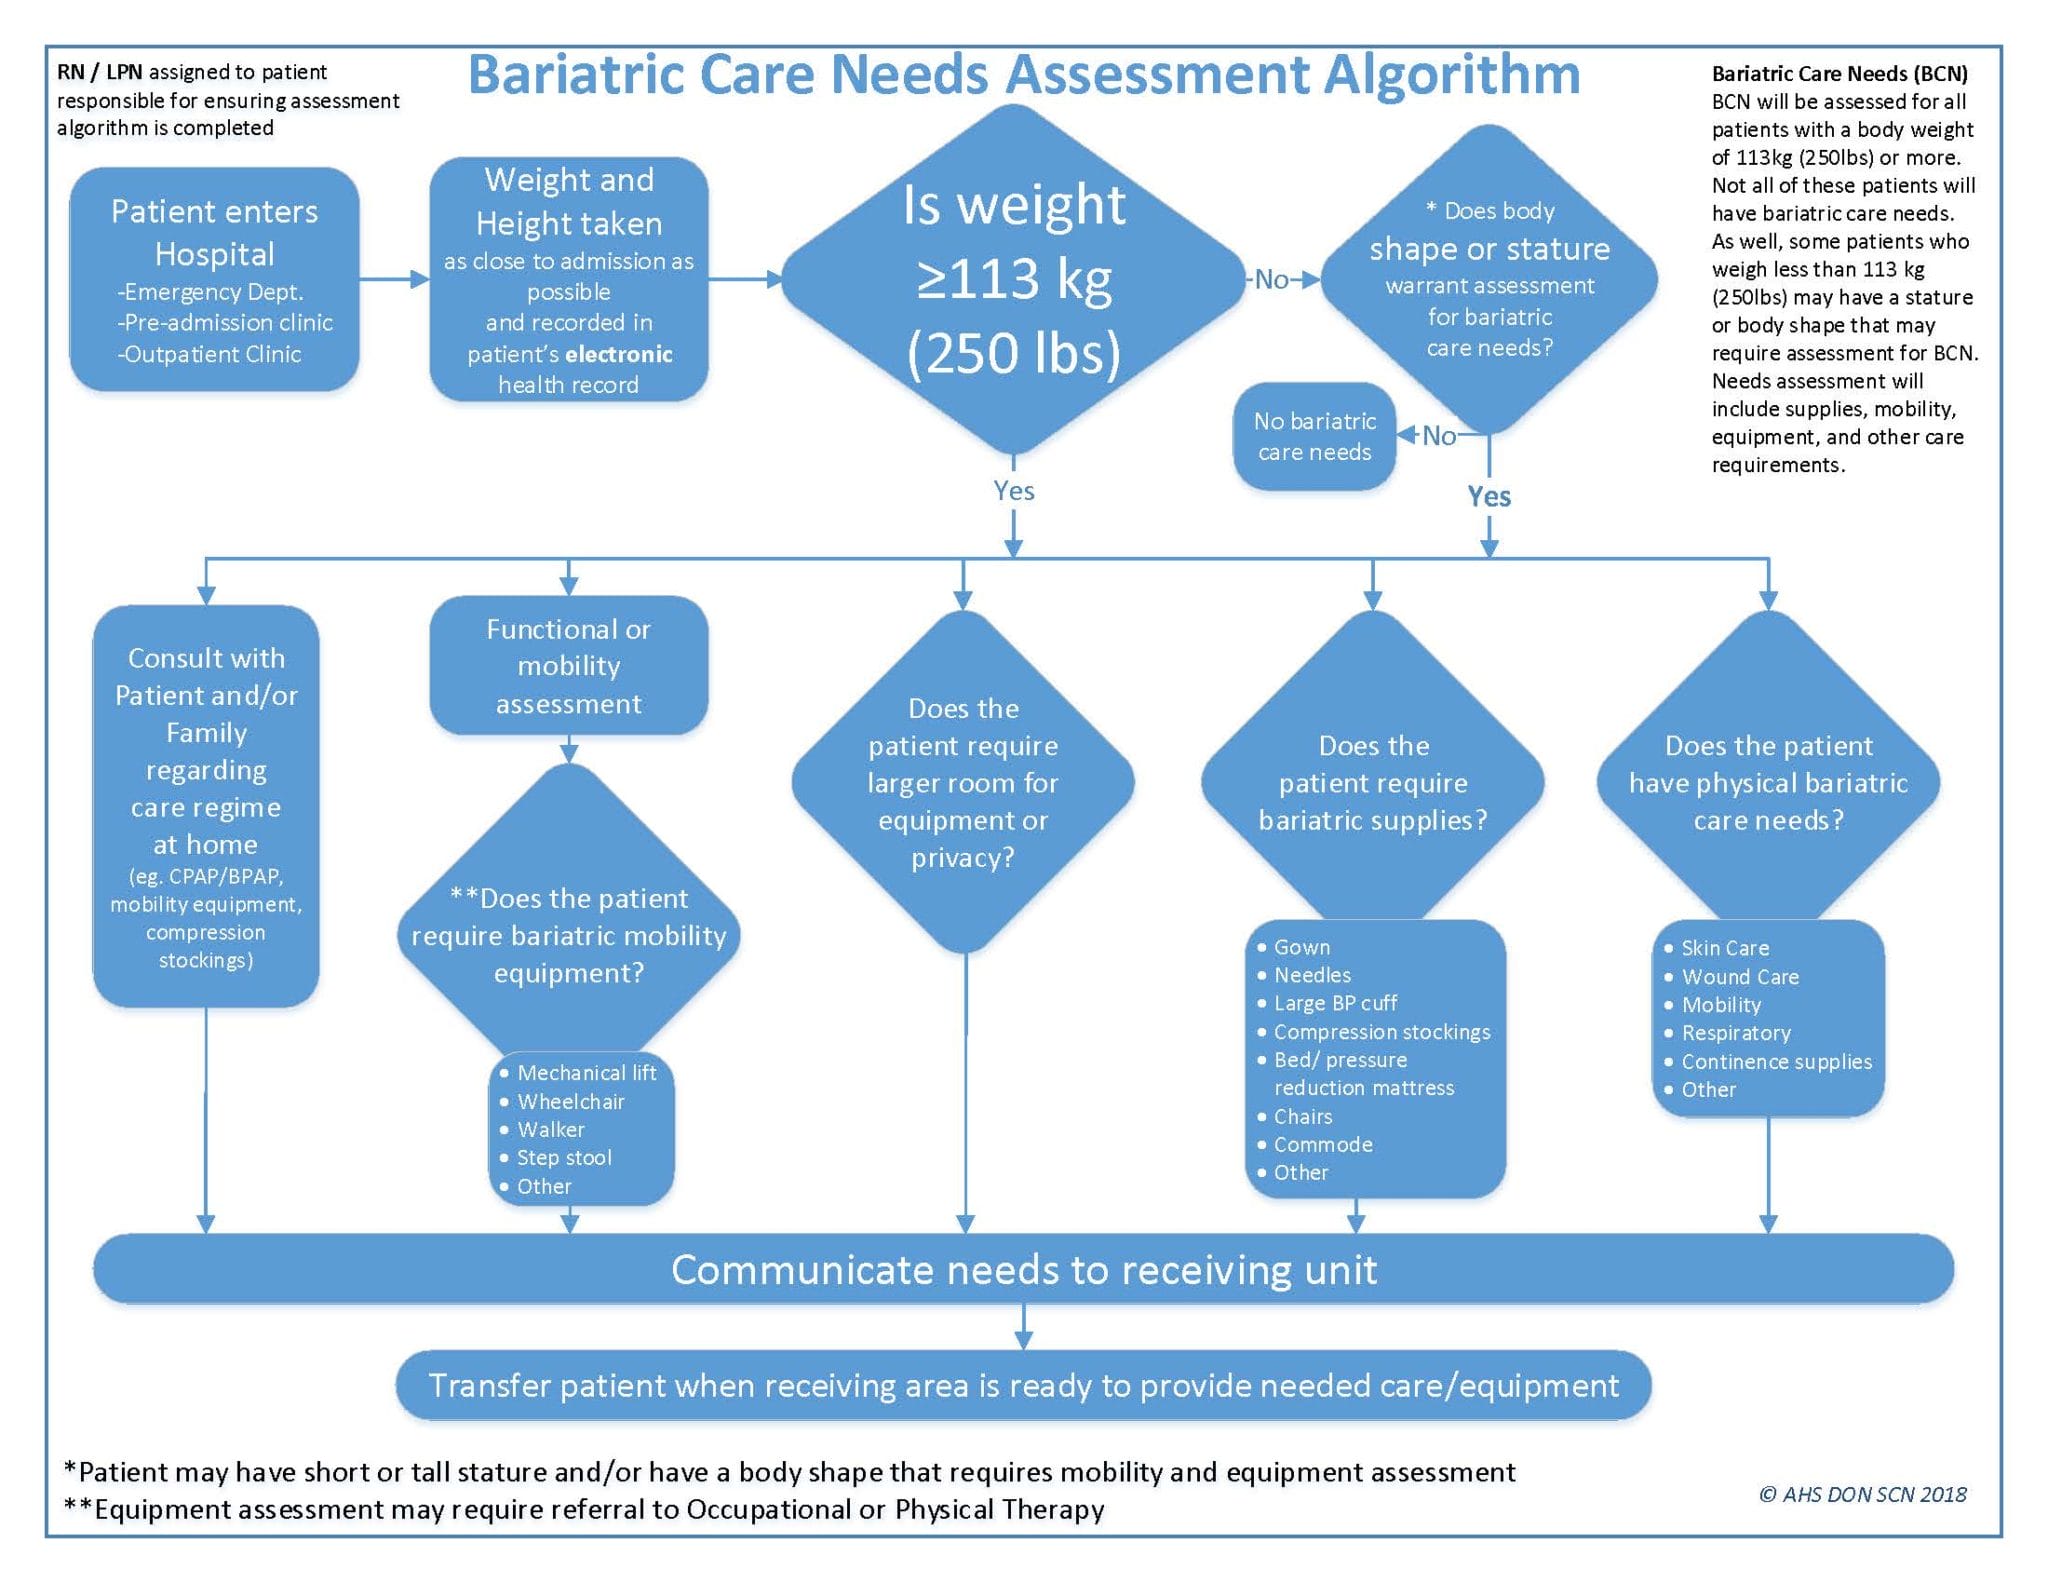 Flowchart detailing a bariatric care needs assessment algorithm, outlining patient evaluation steps based on weight and privacy requirements with consideration for special equipment needs.